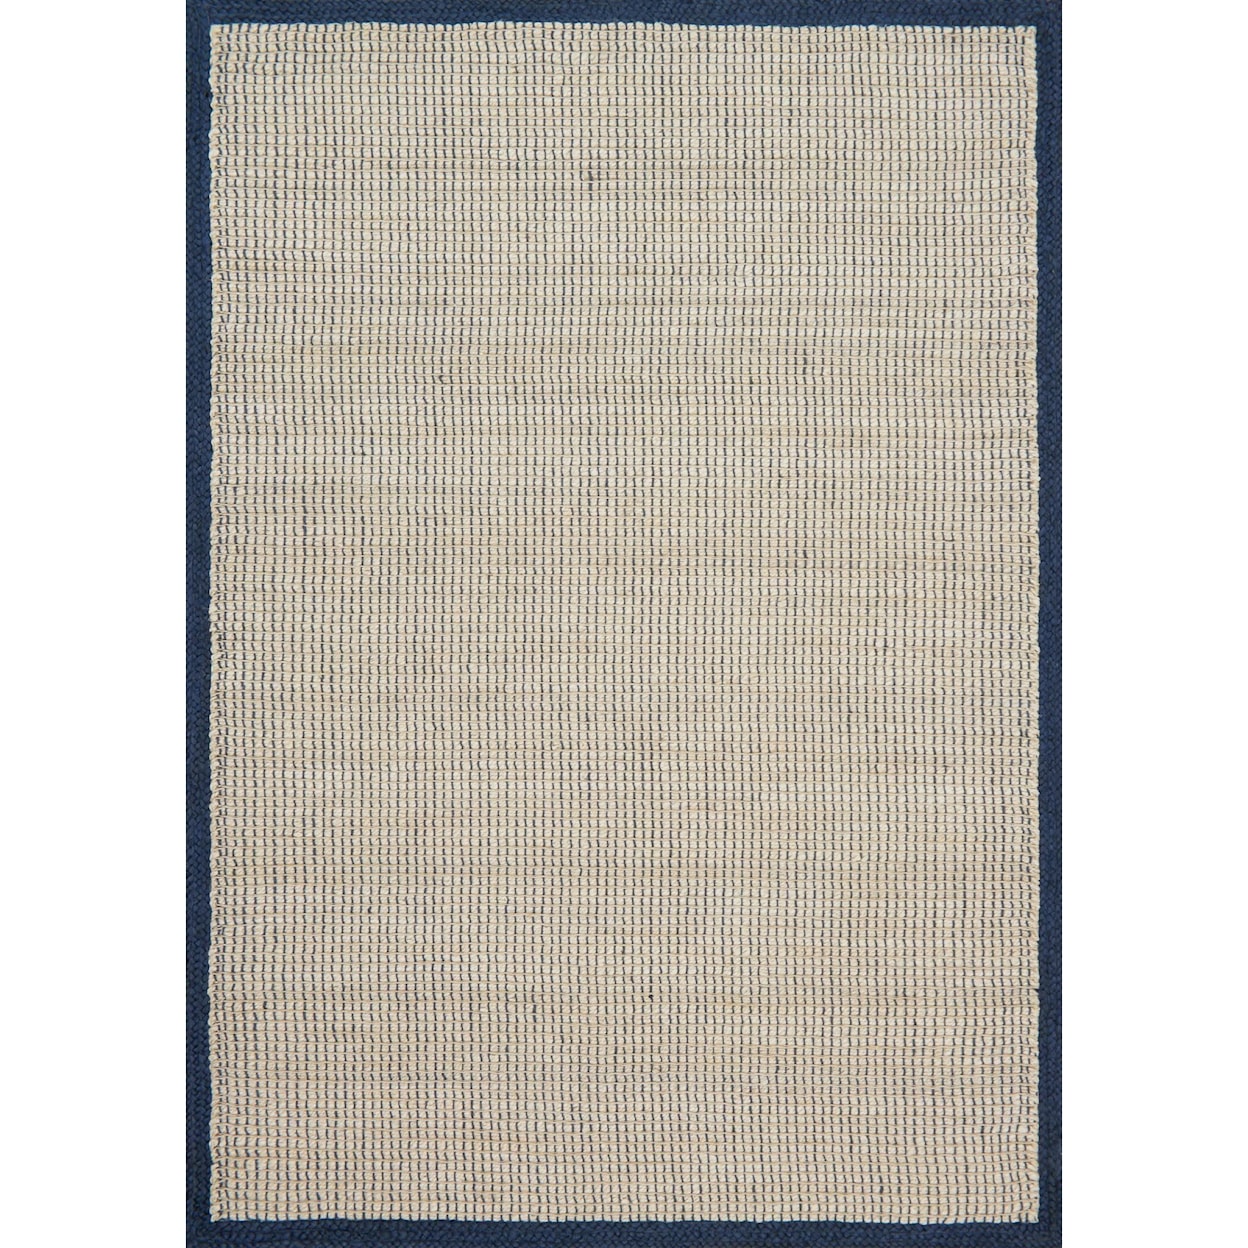 Magnolia Home by Joanna Gaines for Loloi Sydney 2' 3" x 3' 9" Rectangle Rug